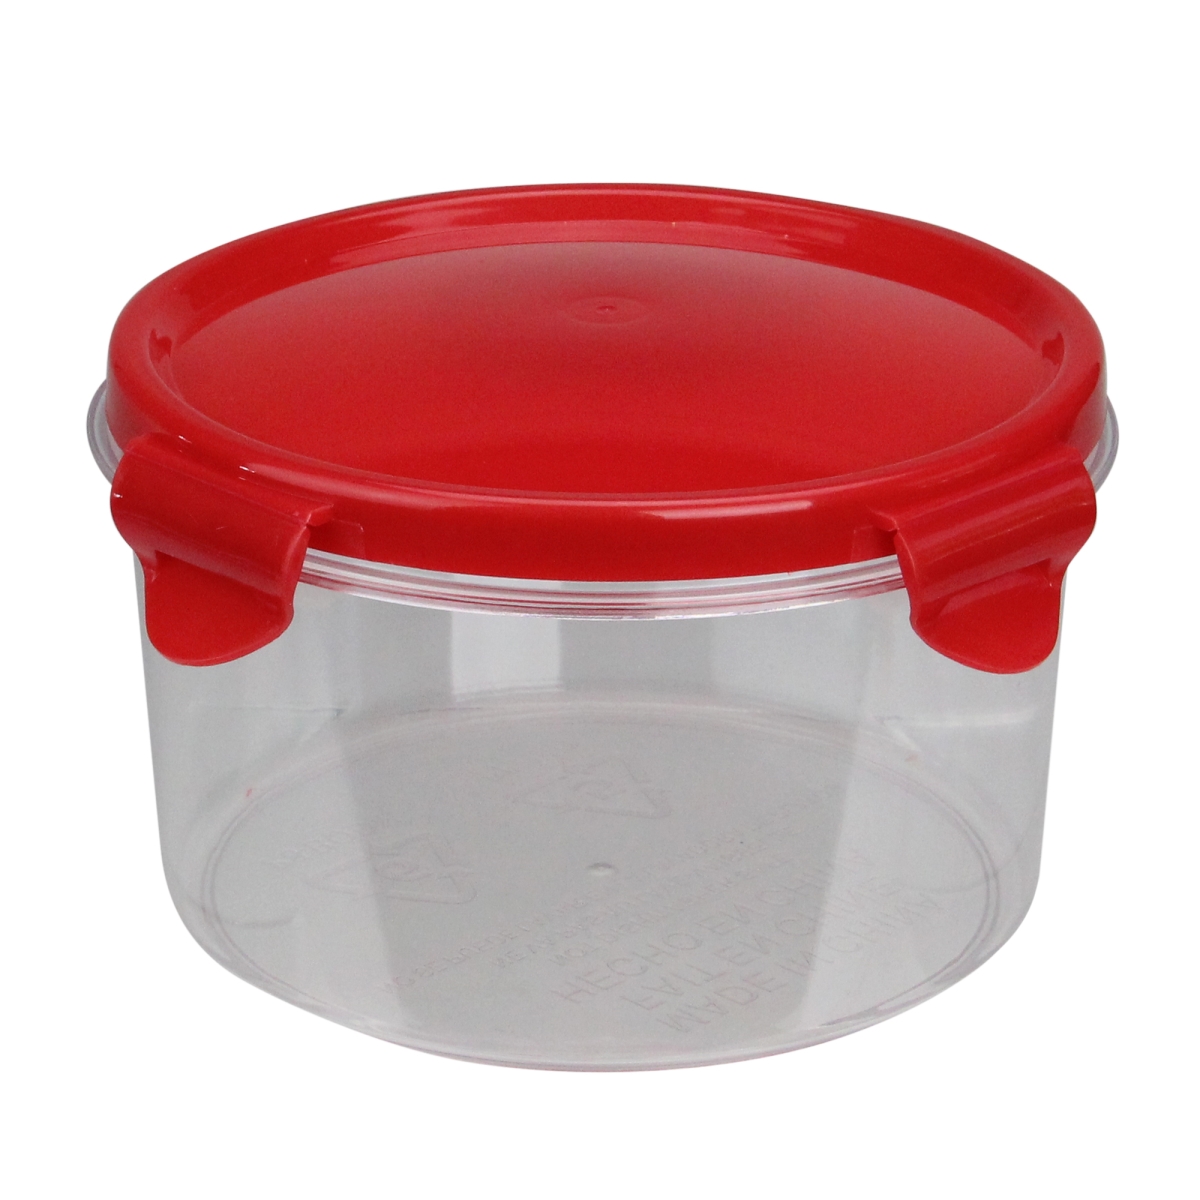 33537554 6 In. Resealable Sugar Storage Container With Attached Lid